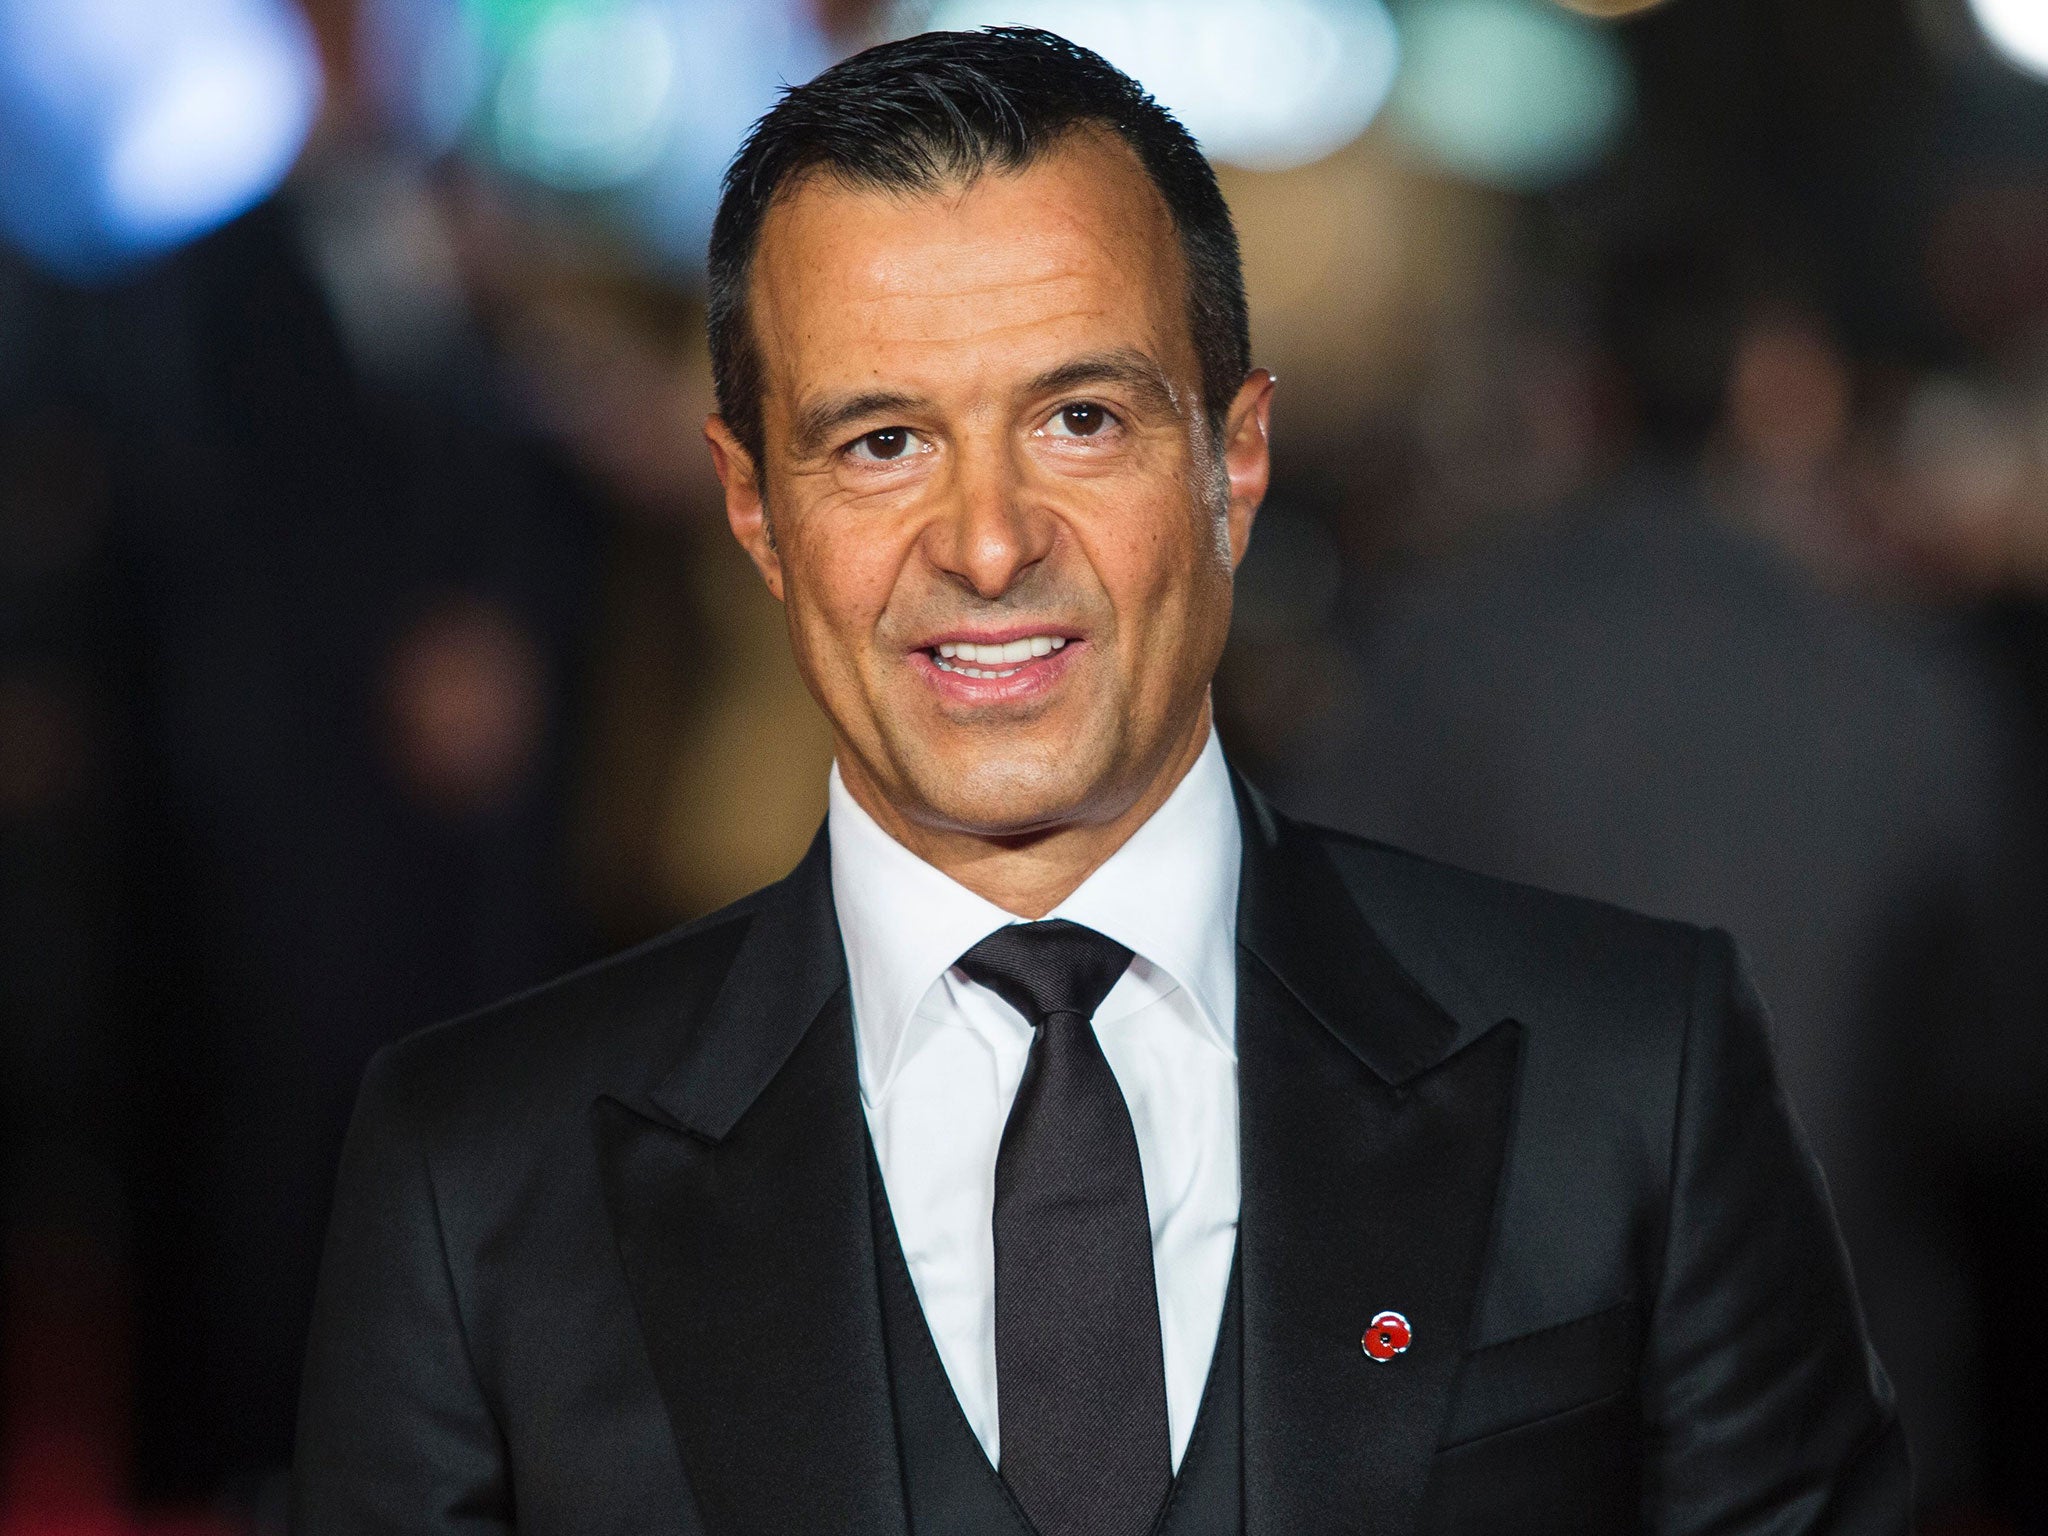 Jorge Mendes has several clients working at Wolves